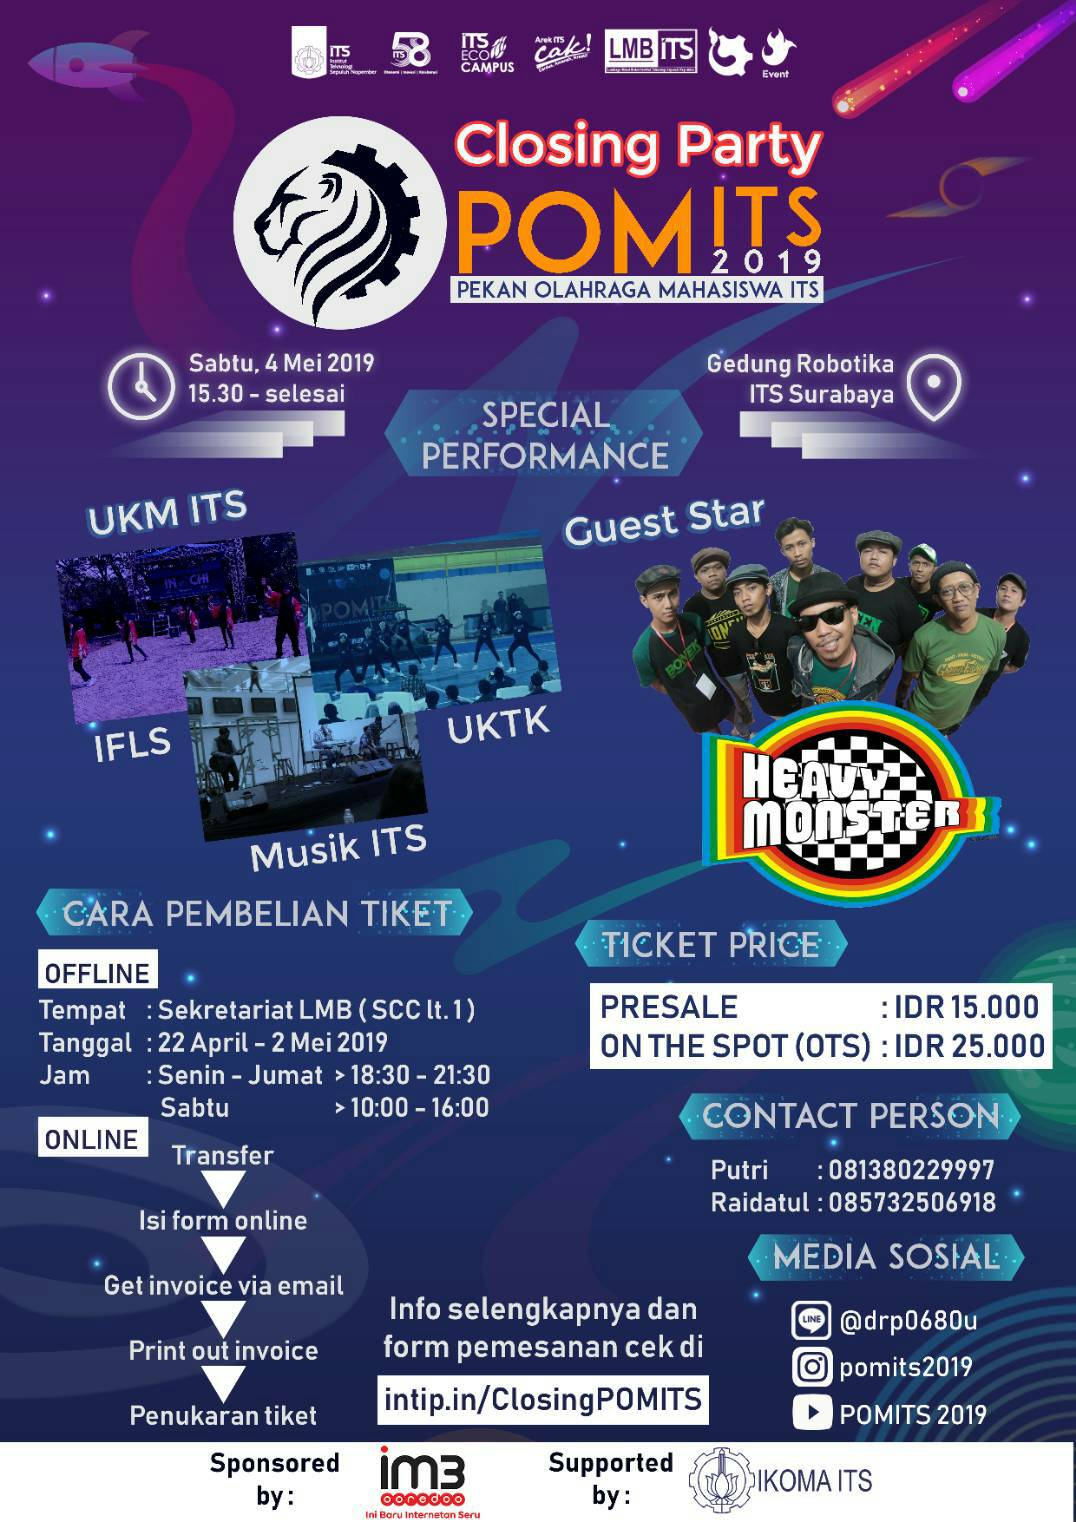 Closing Party POMITS 2019